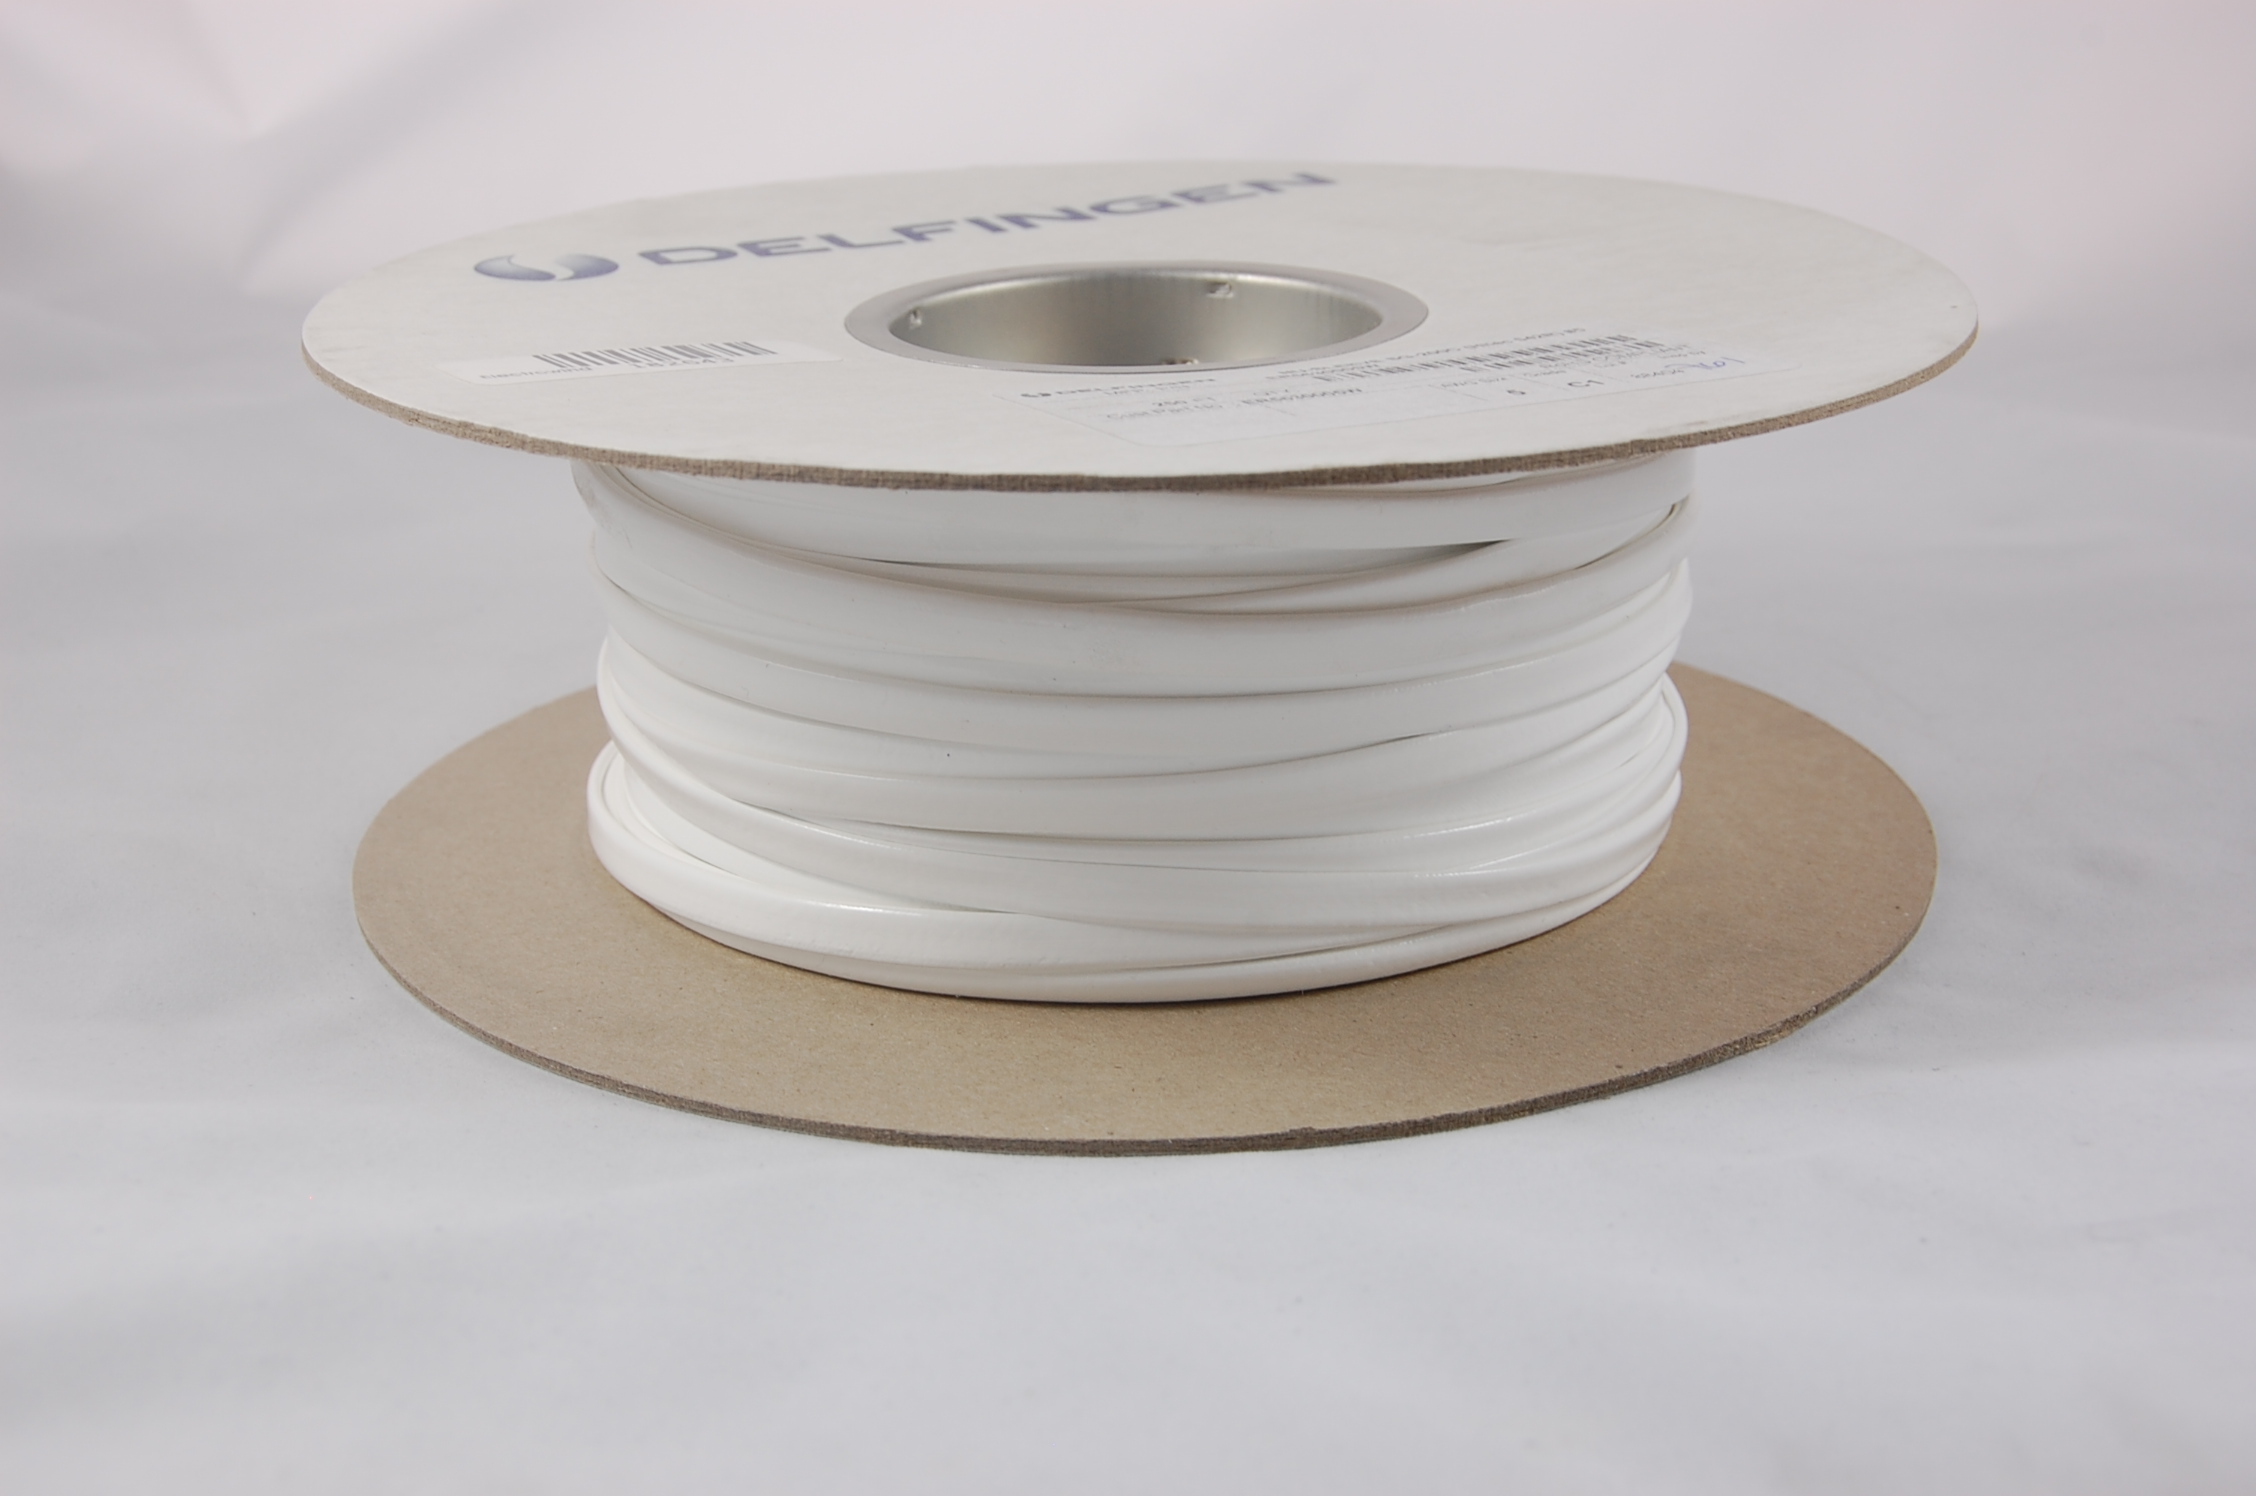 #14 AWG NU-SLEEVE SG-200 C-1 (2500V) Silicone Rubber Coated Braided Fiberglass Sleeving (542F) 200°C, white, 500 FT per spool